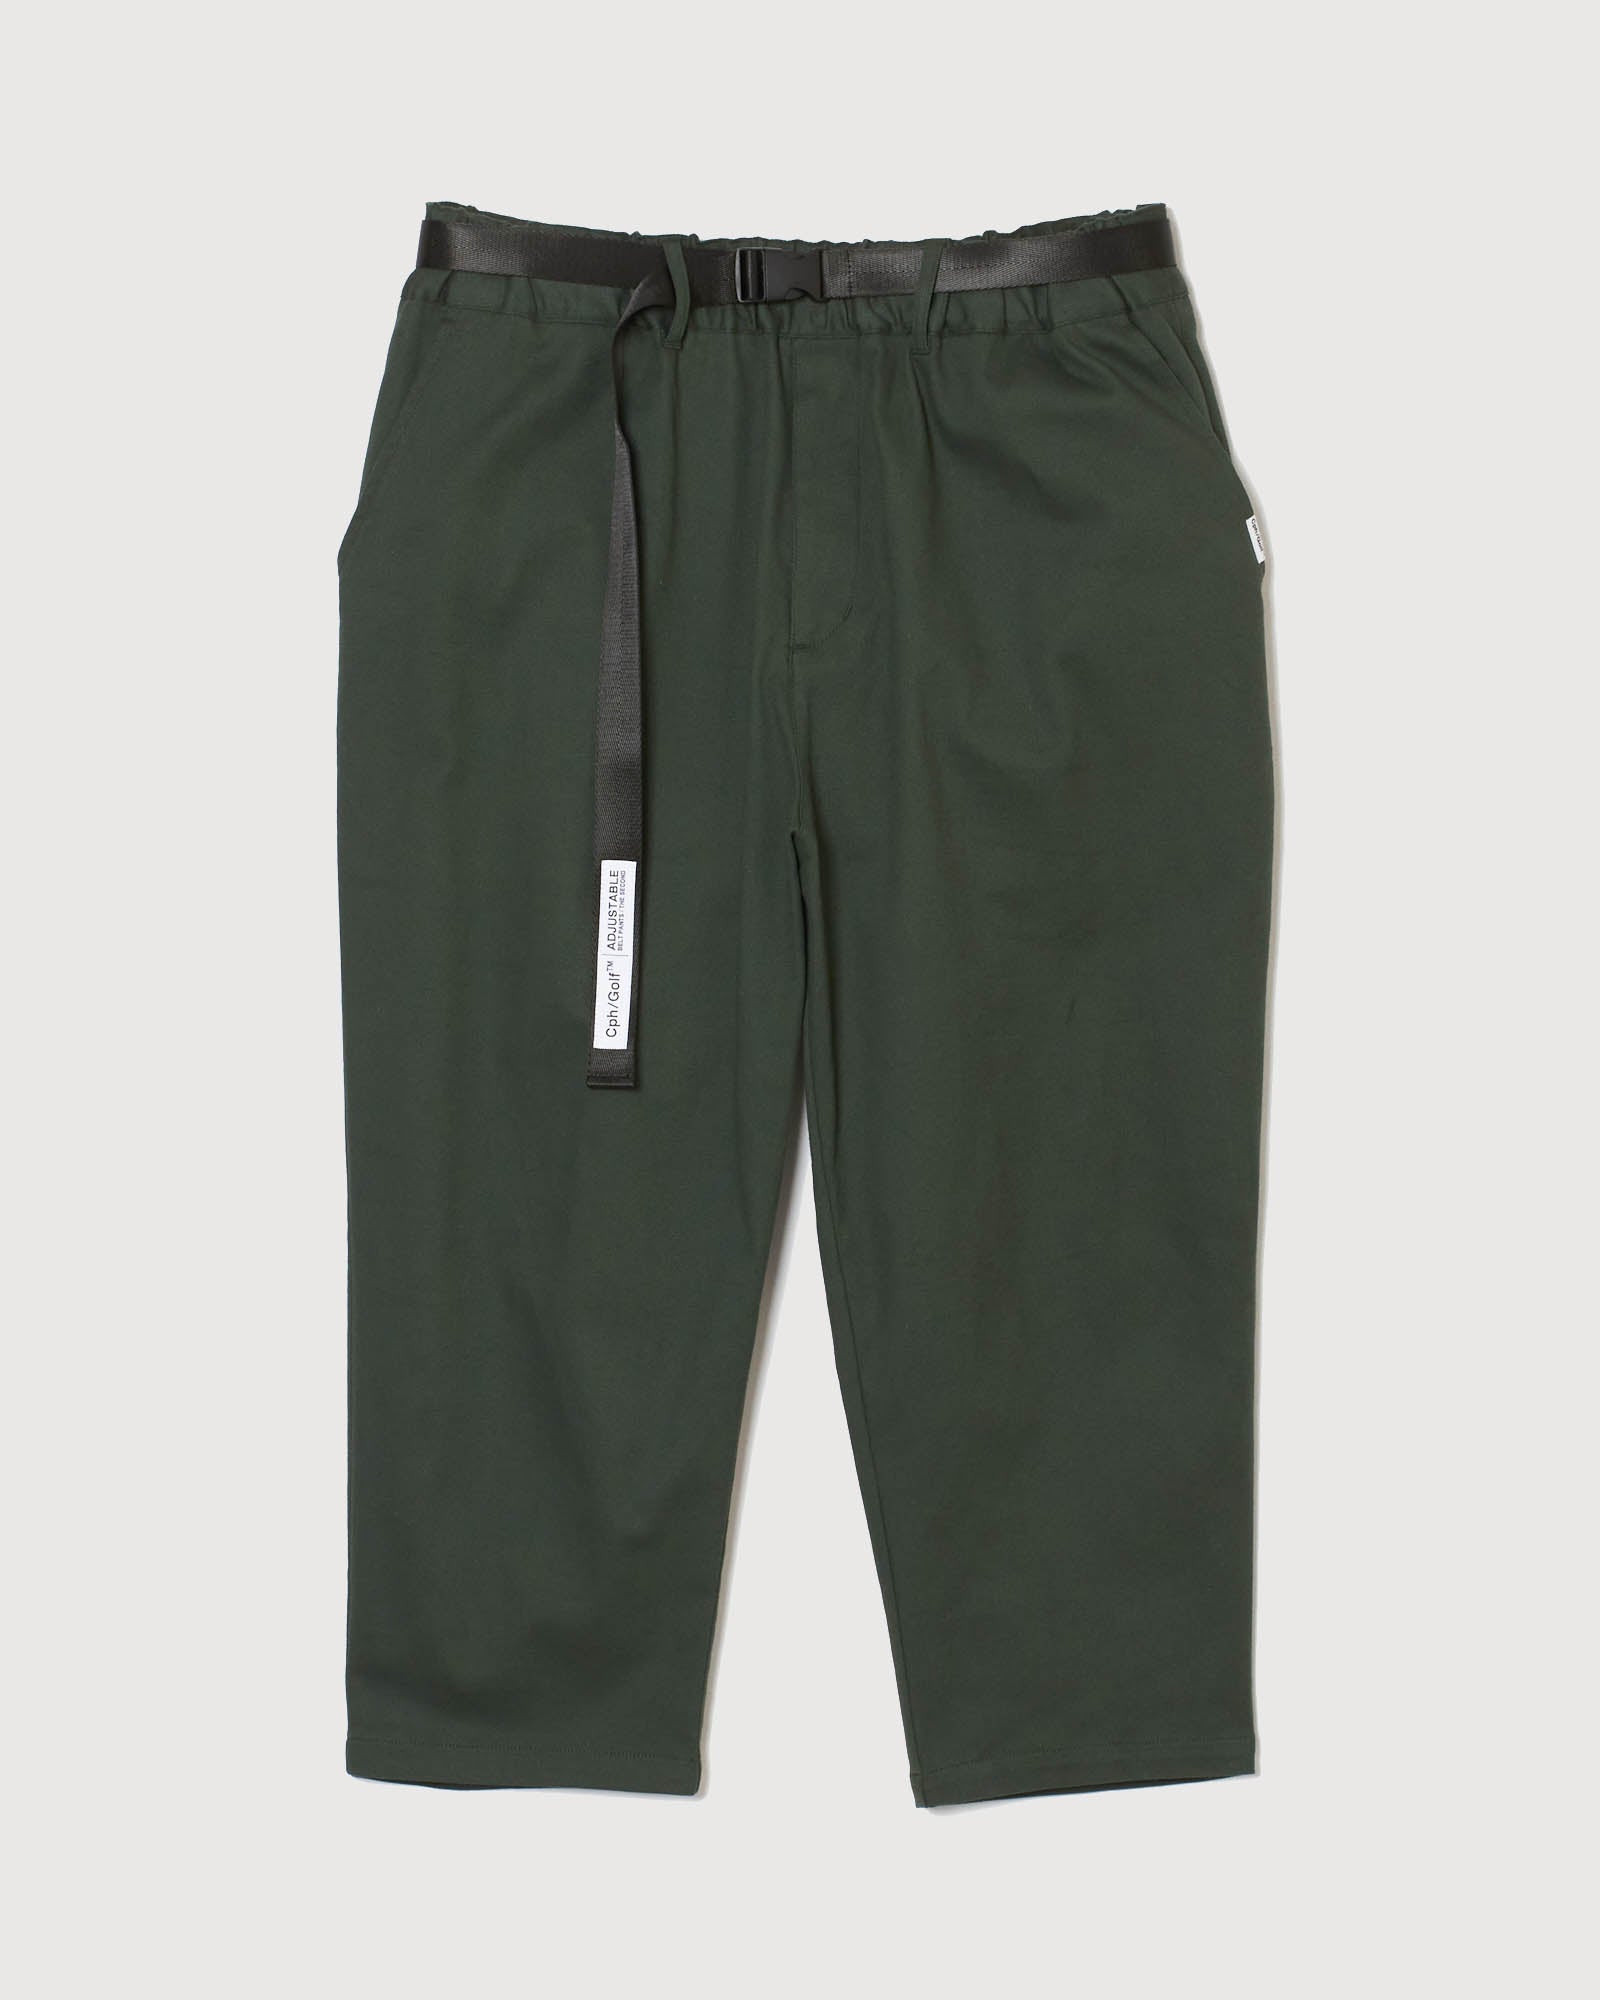 WOMENS】#ADJUSTABLE CROPPED CHINO PANTS - GREEN - – Captains Helm Golf